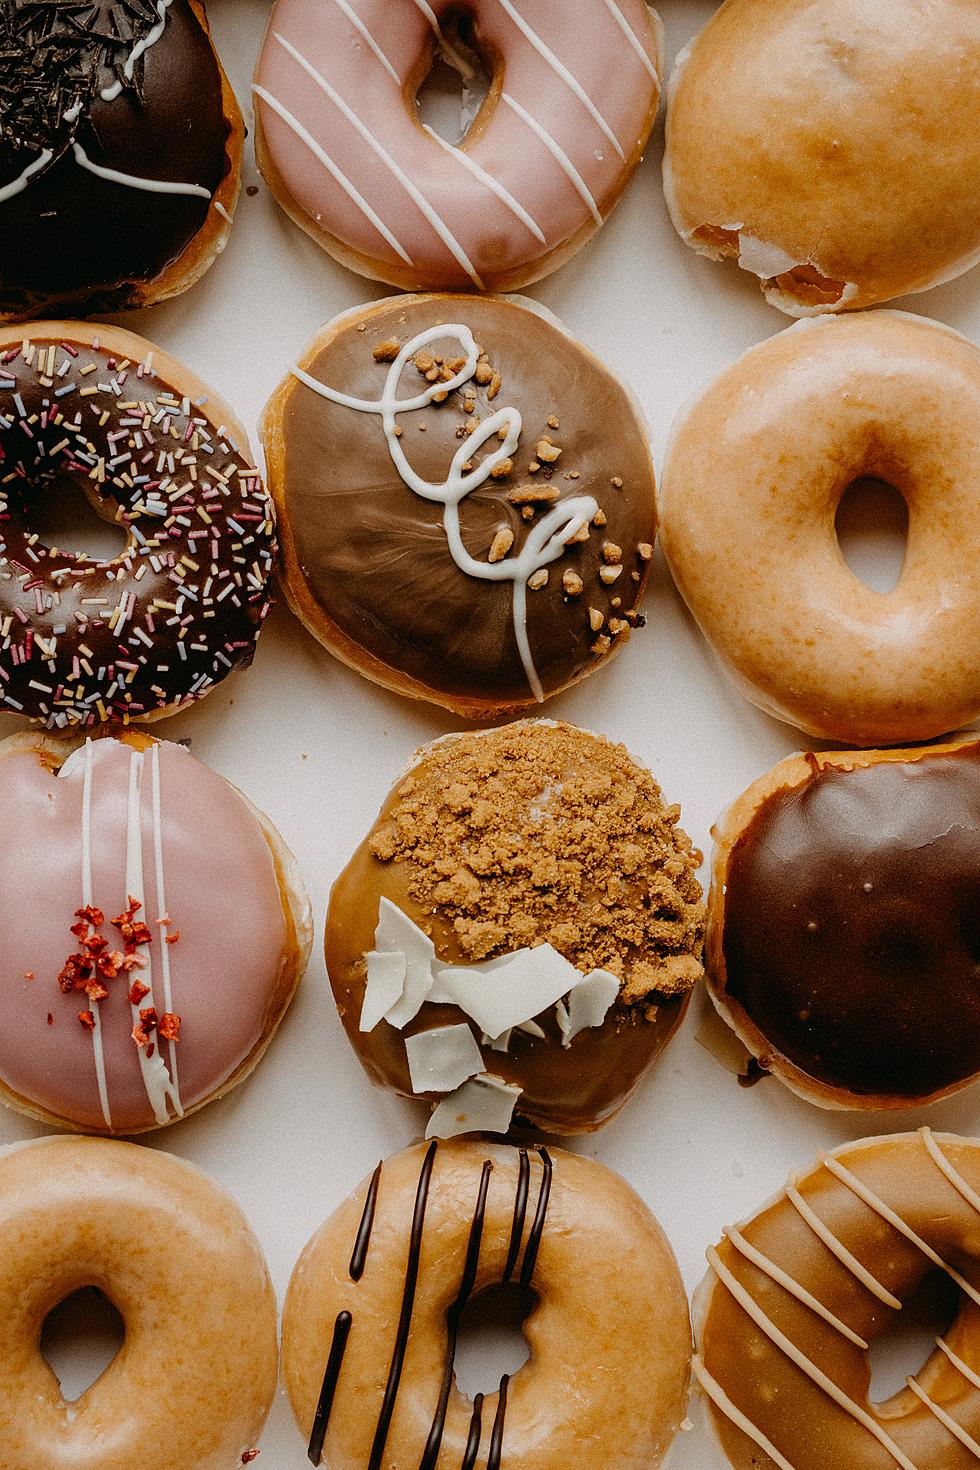 Boise's Best Donuts: Savoring The Top Donuts In Treasure Valley